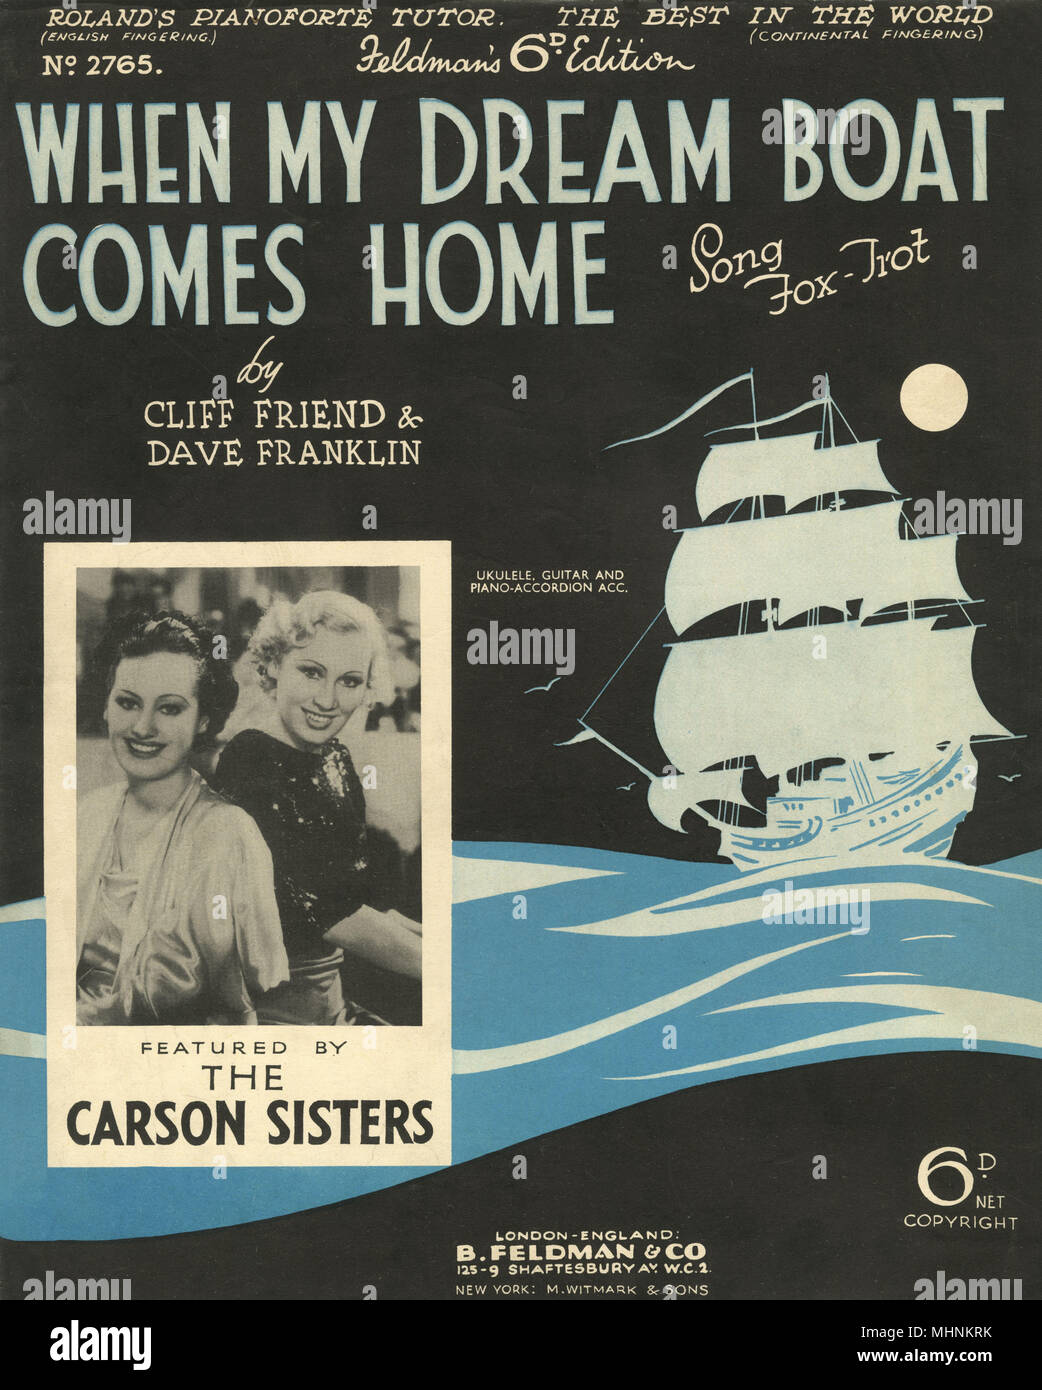 When my dream boat comes home - Music Sheet Cover Stock Photo